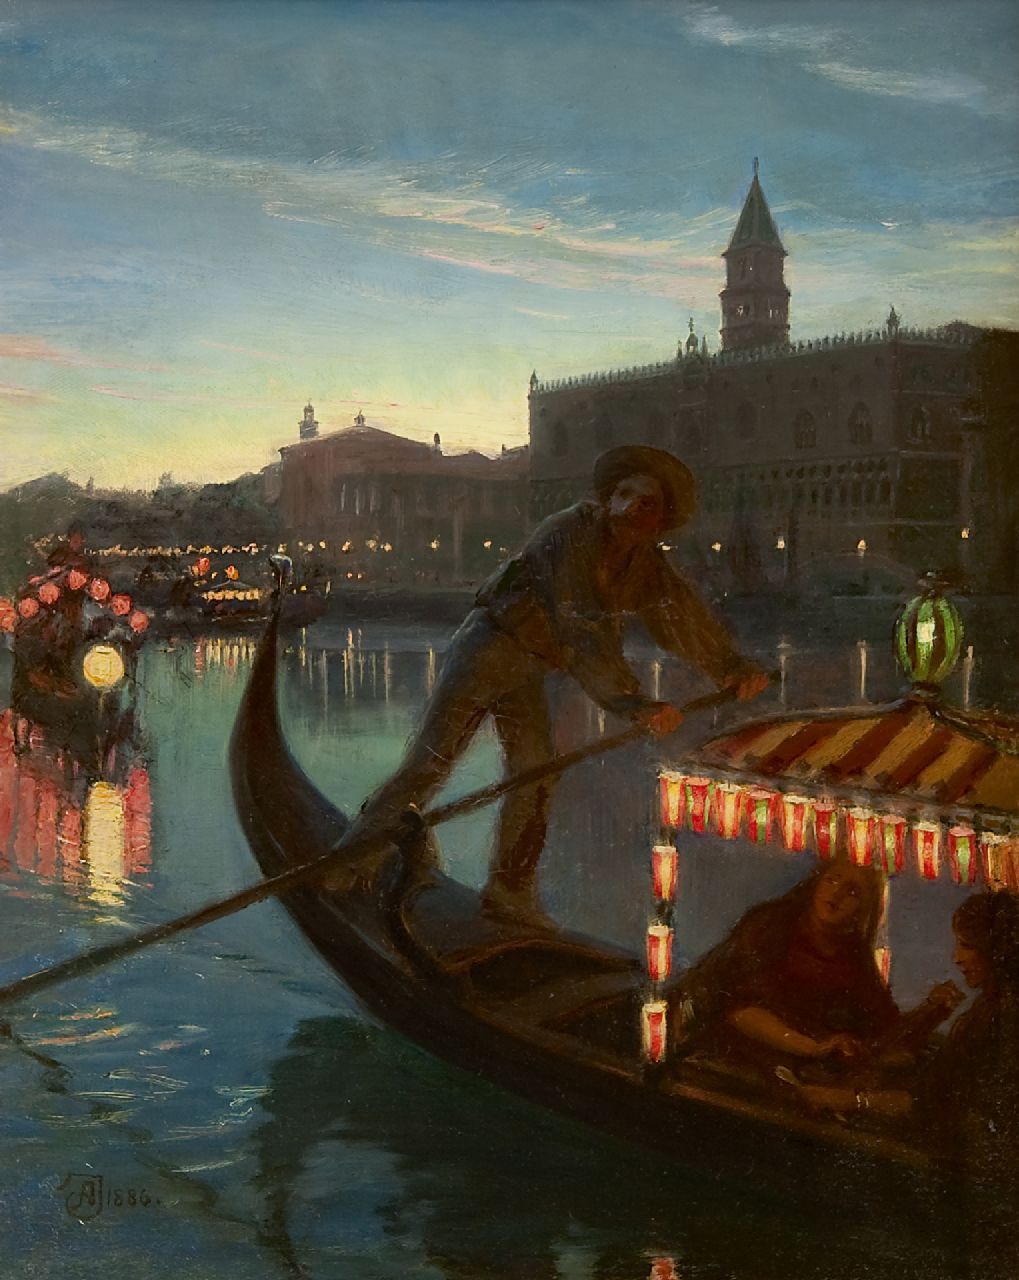 Jerndorff A.A.  | August Andreas Jerndorff | Paintings offered for sale | A gondola in front of the Doge's Palace in Venice, at night, oil on canvas 41.0 x 33.0 cm, signed l.l. with monogram and dated 1886